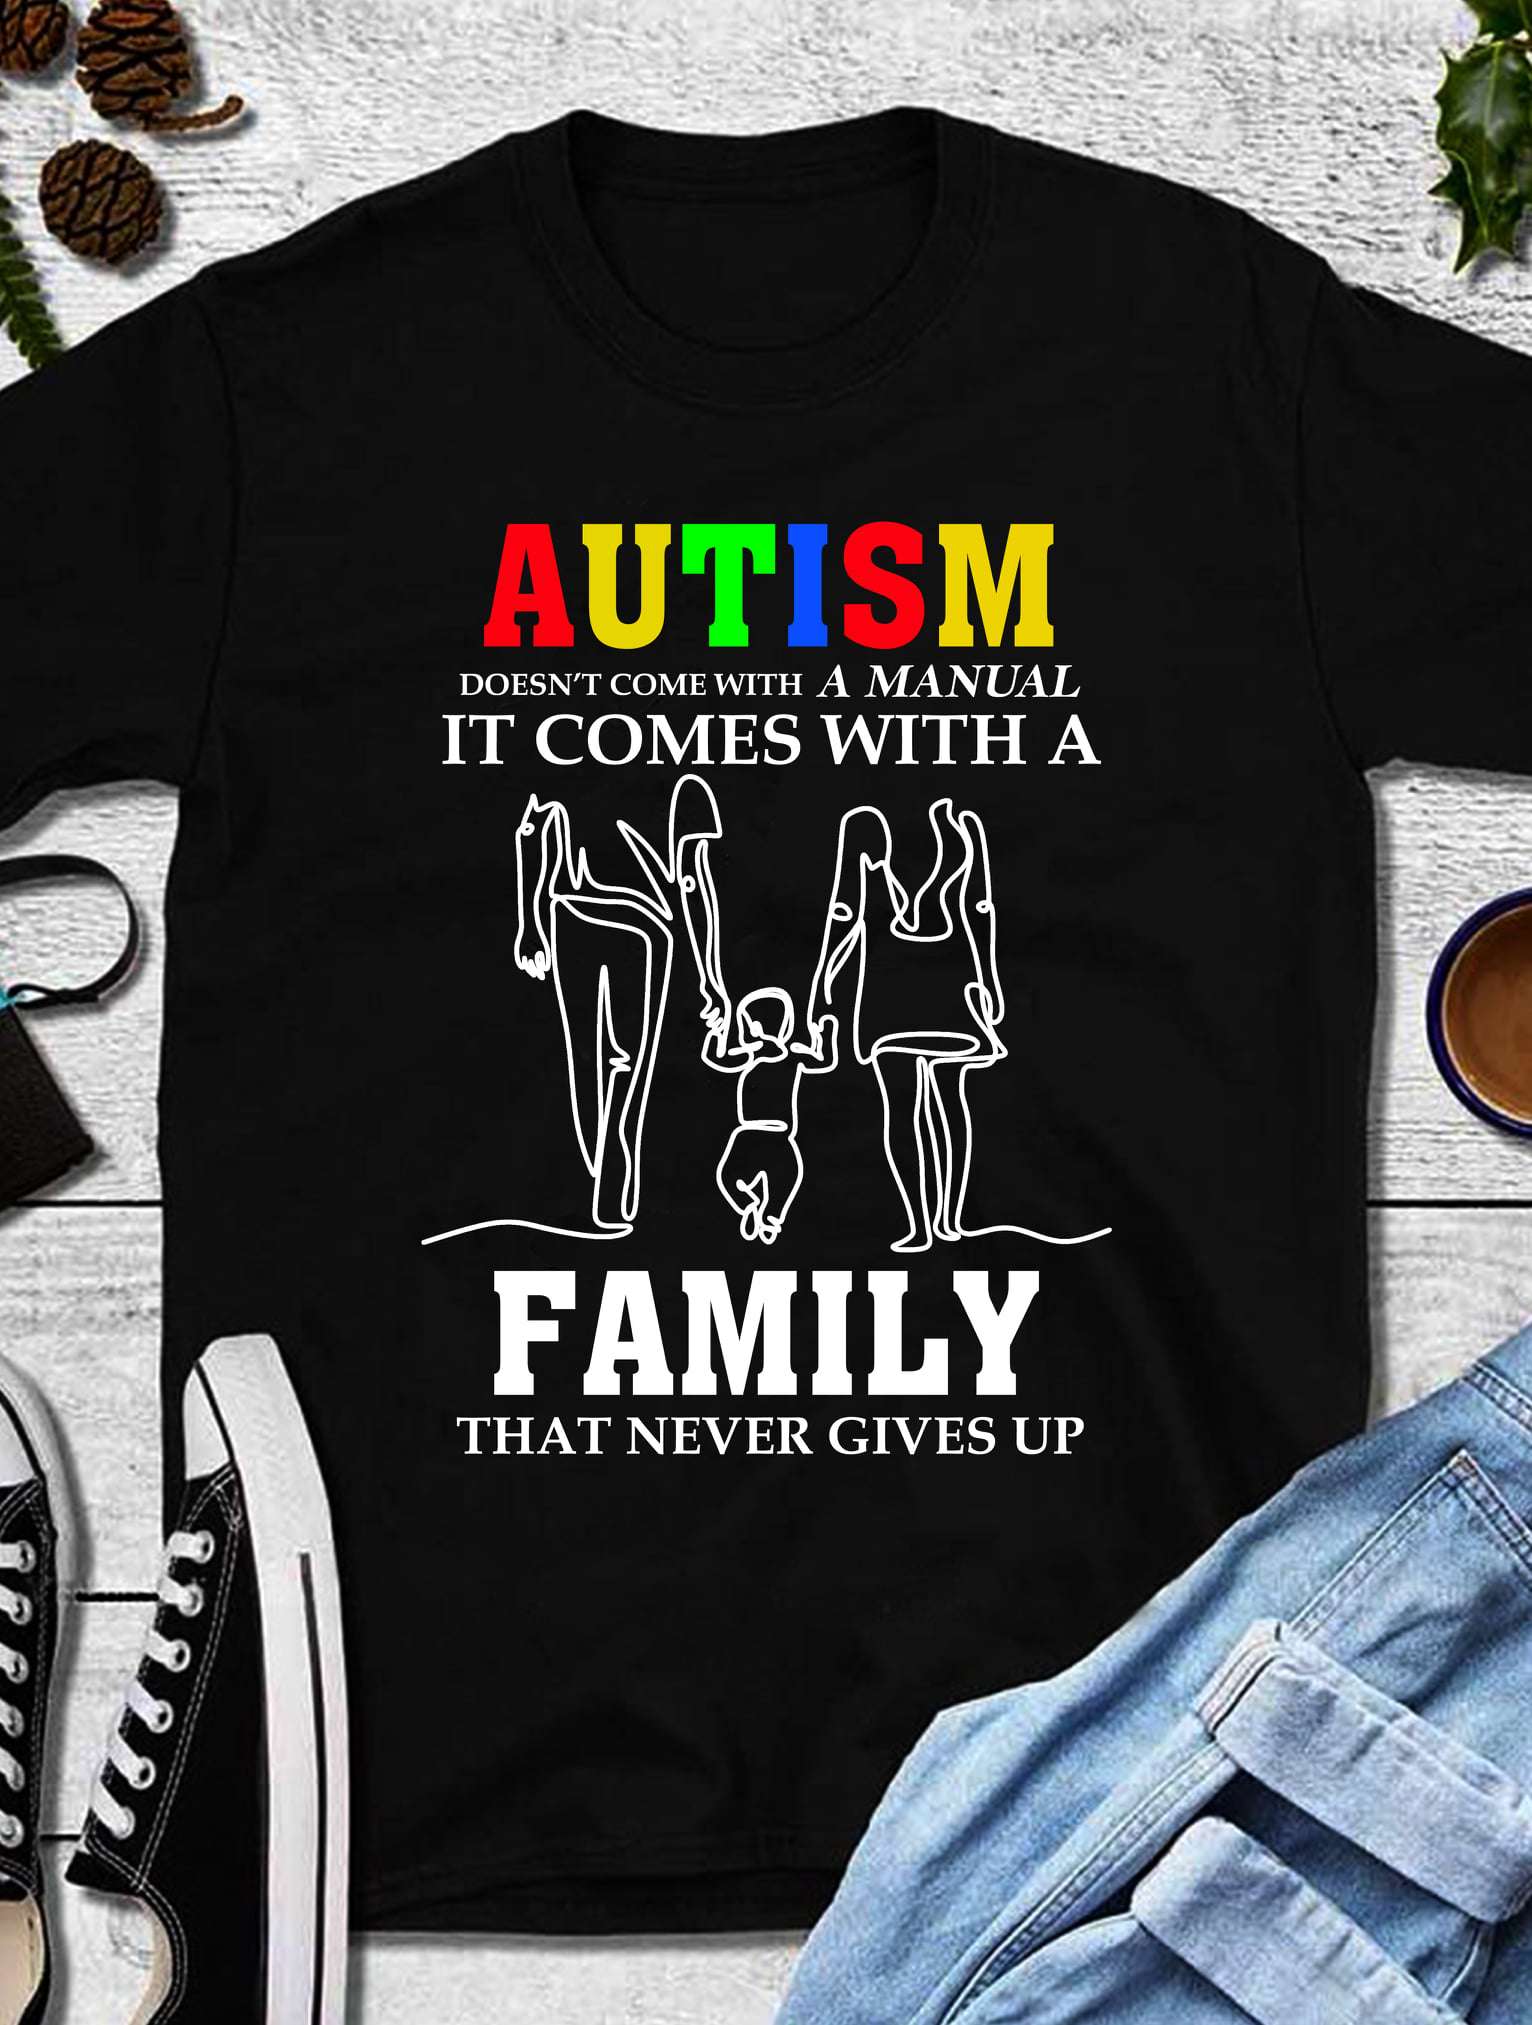 Autism doesn't come with a manual, it comes with a family that never gives up - Autism awareness for family